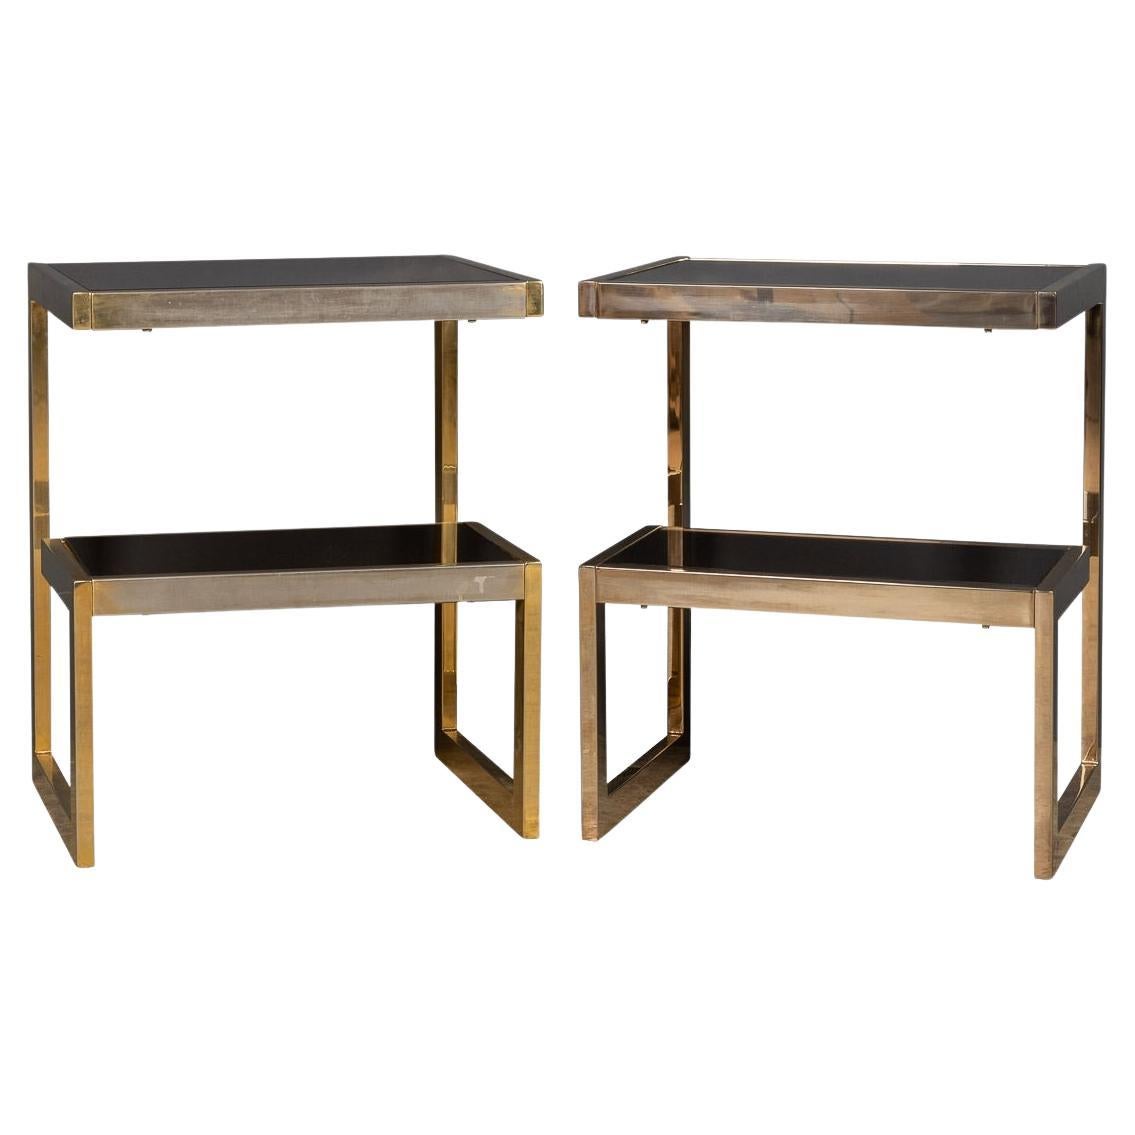 20th Century Pair of Chrome & Glass G Tables by Belgo, C.1970